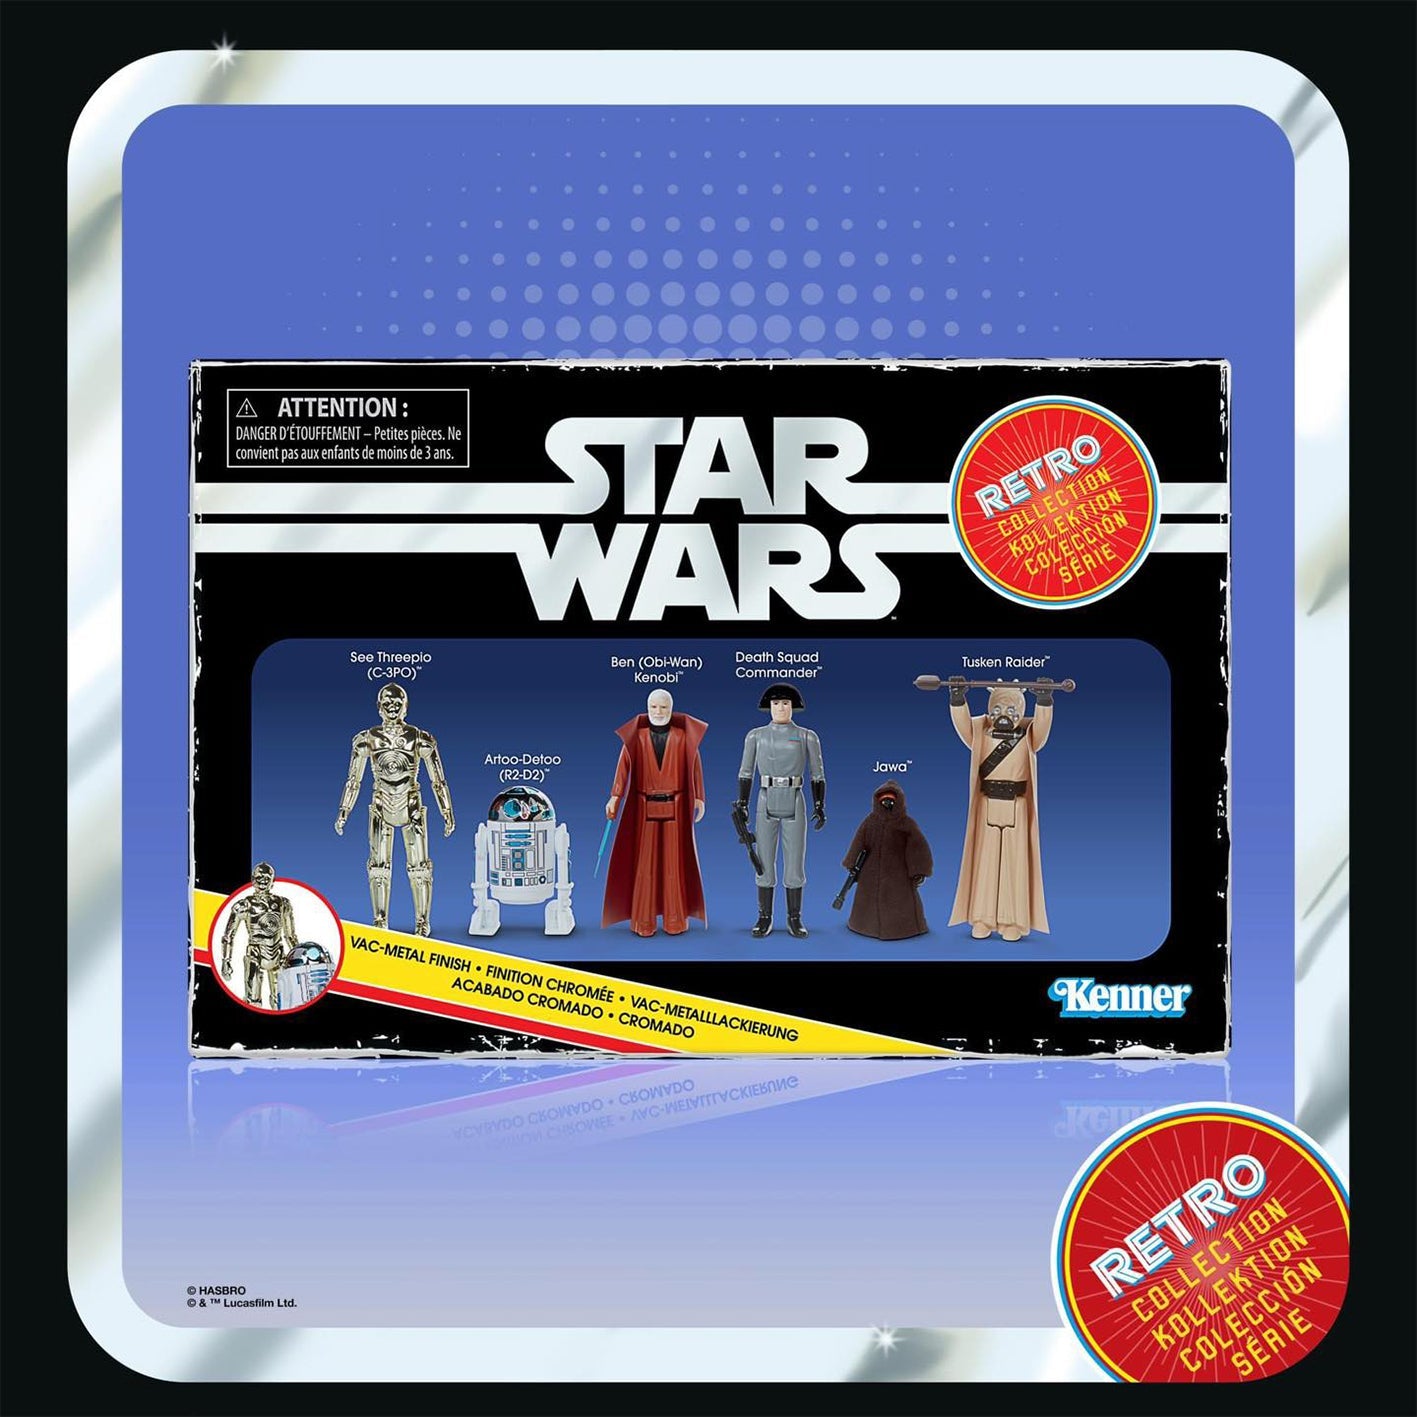 Set 2 Retro Collection 6-pack, Star Wars Retro Collection